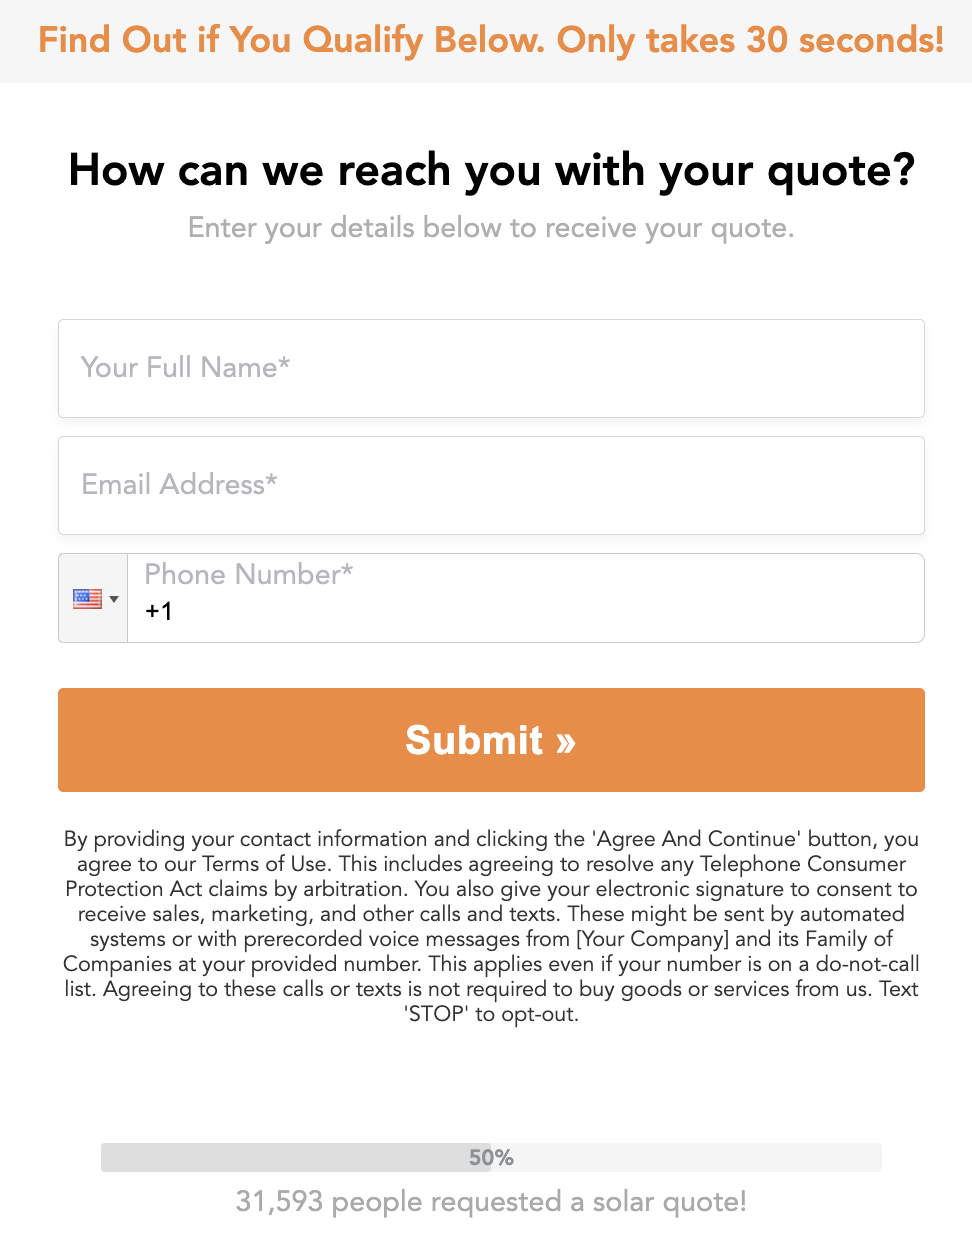 TCPA Opt-In Text Form